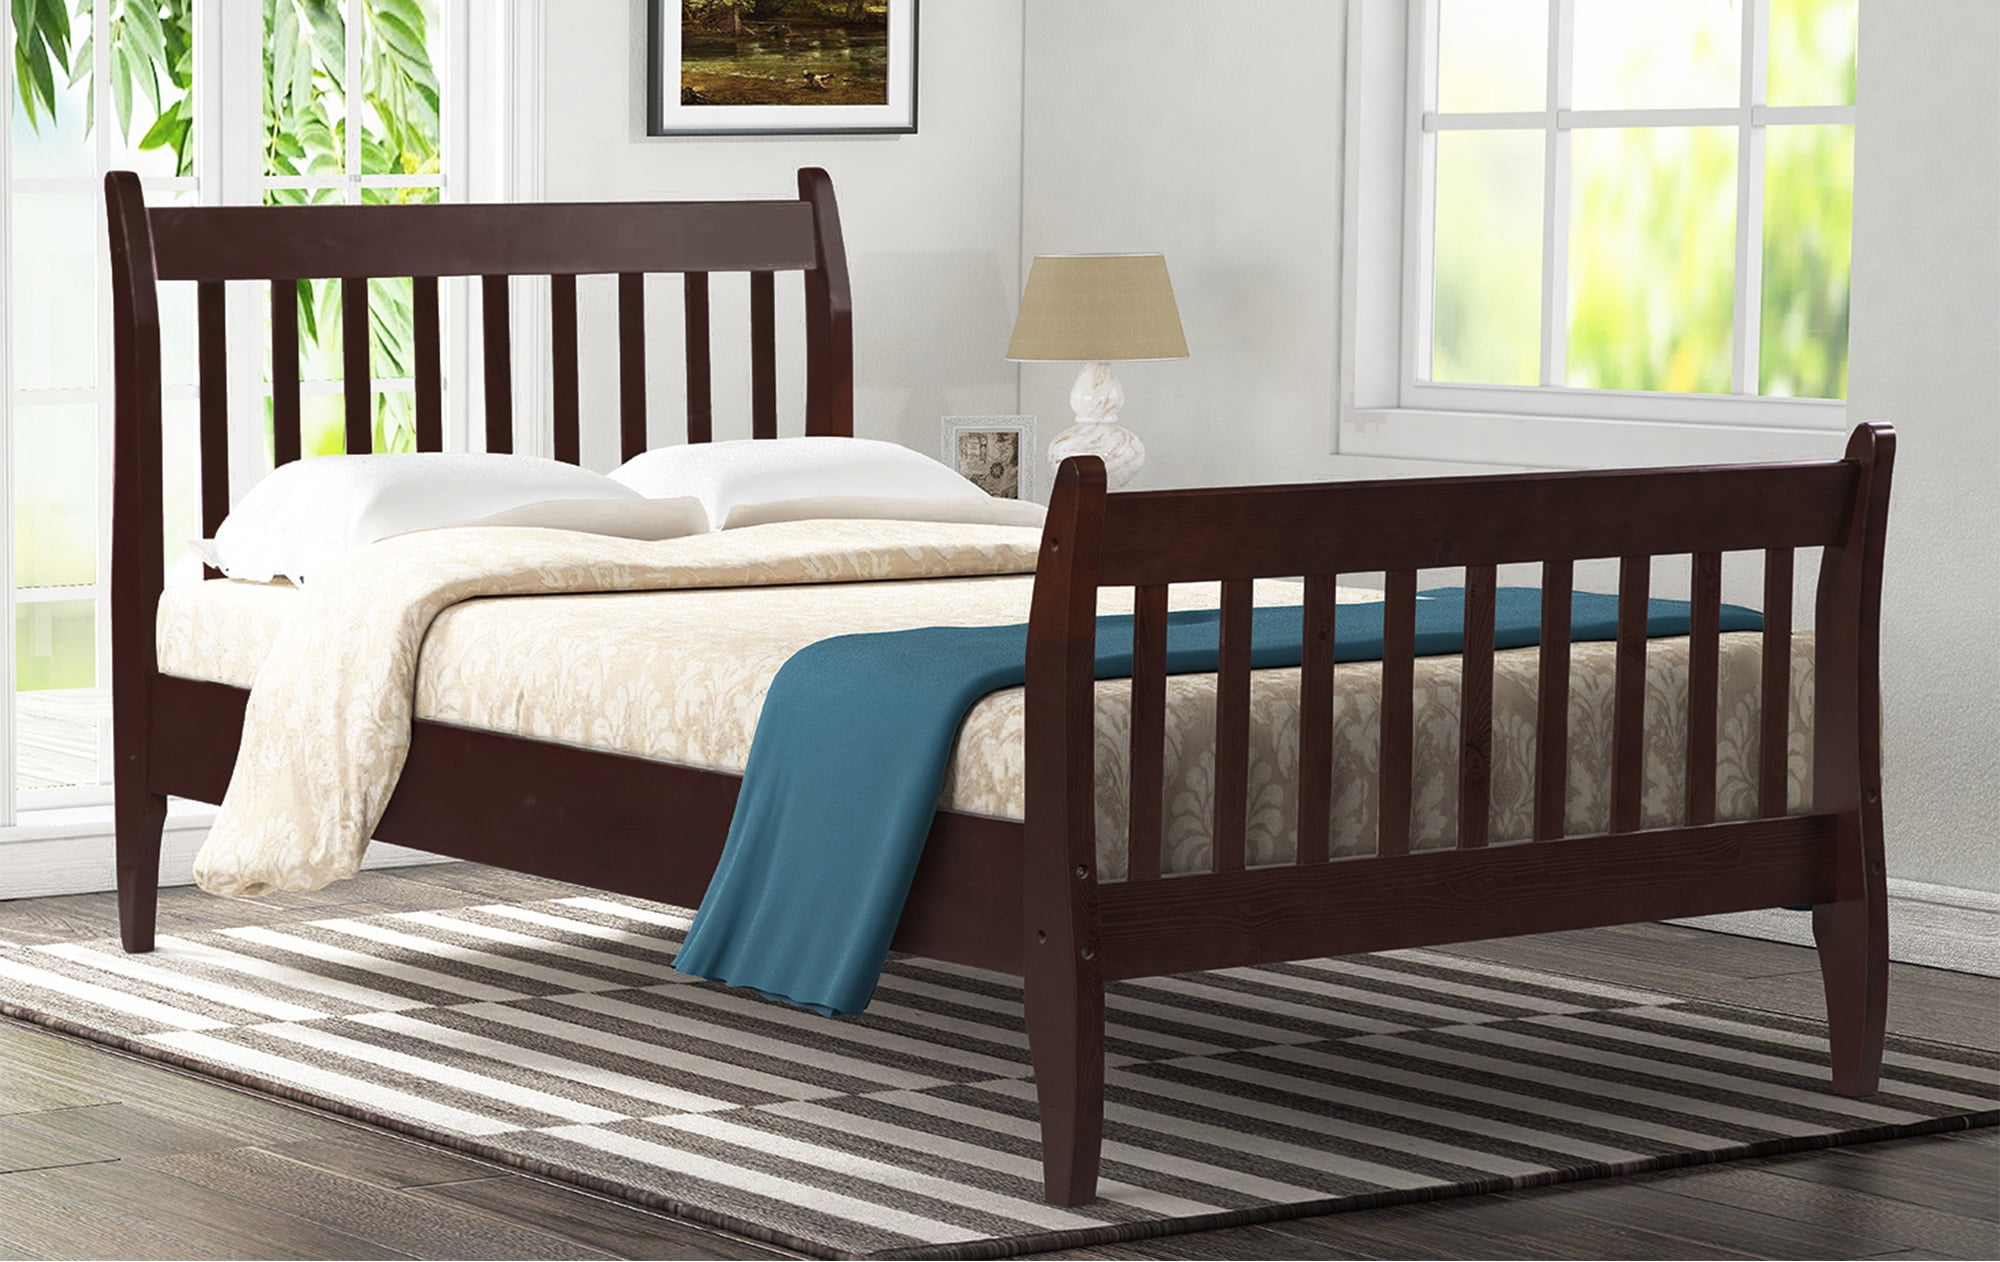 Details about   Twin/Full/Queen Size Wooden Platform Bed Frame Foundation w/Headboard Footboard 